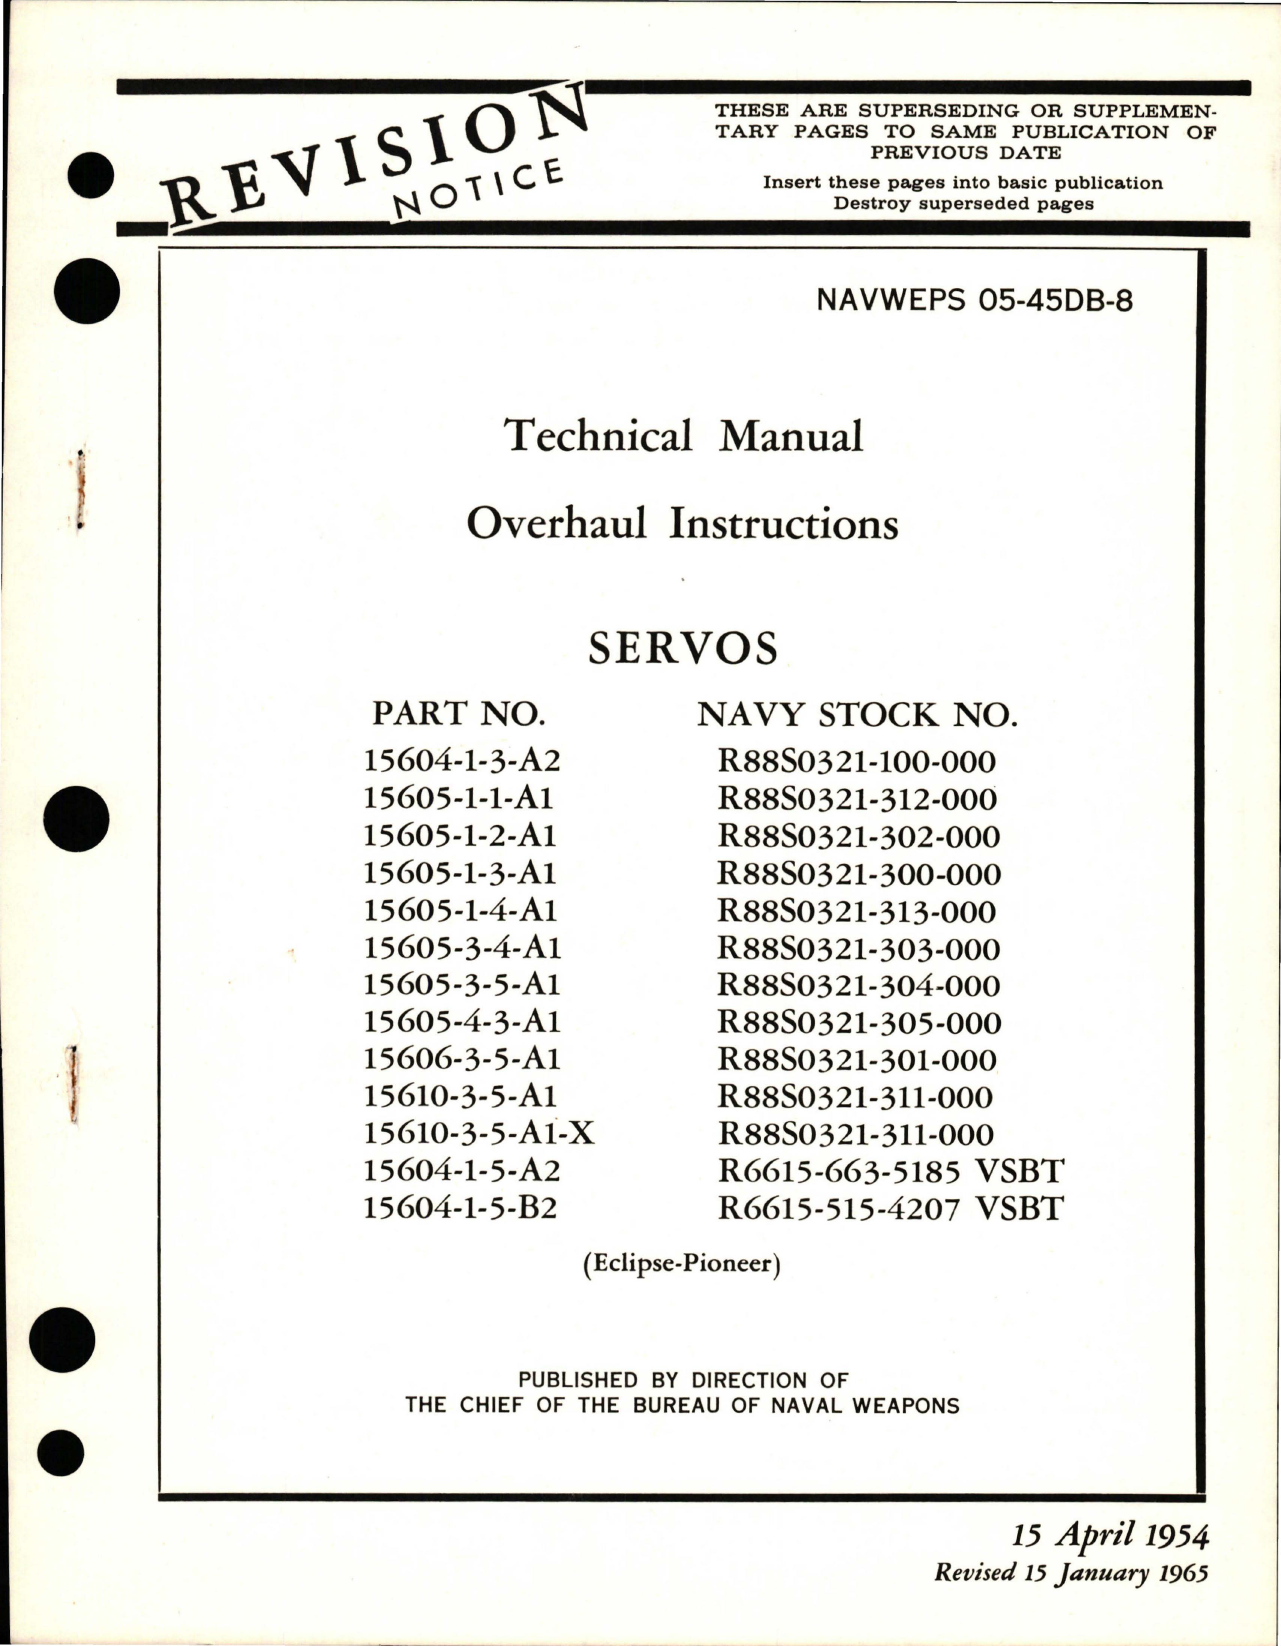 Sample page 1 from AirCorps Library document: Overhaul Instructions for Servos